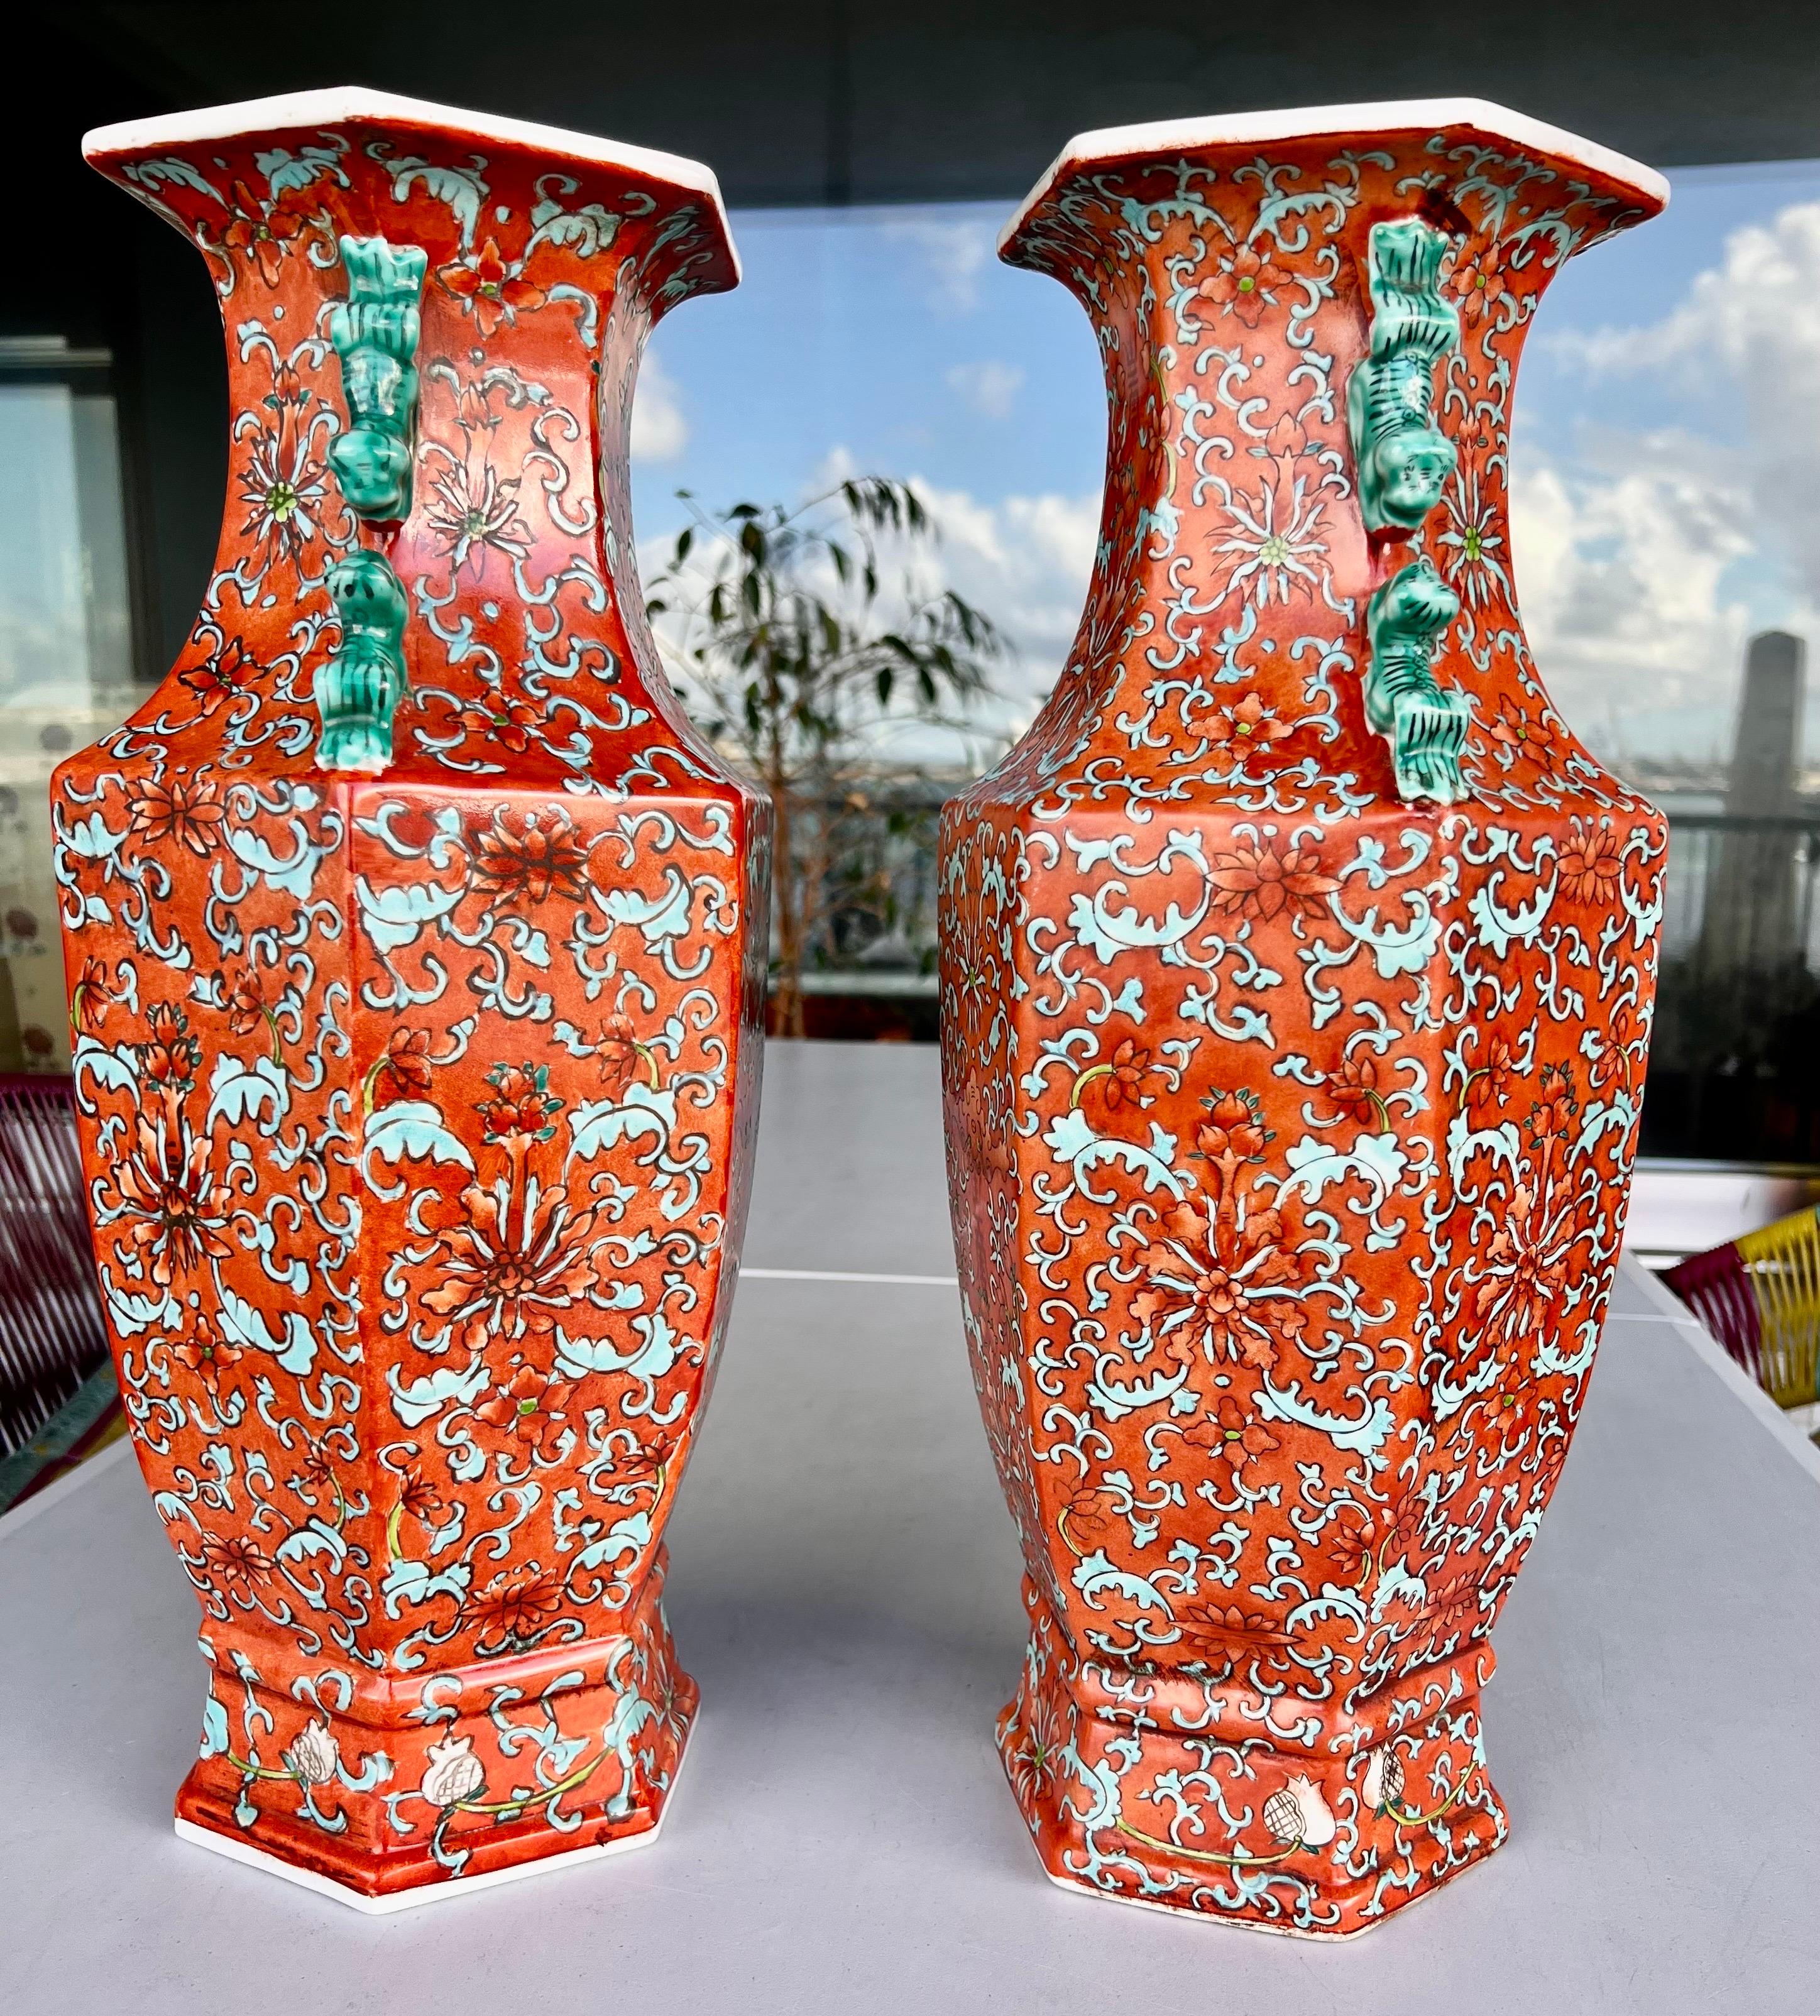 Chinese Ceramic vases mid XX century with option for electricity and convert them in lamps.
Beautiful pieces for central decor of living room or main reception area.
Beautiful Coral and green design and dragons. 
Sizes 43x20 cm / 16.92 x 7.87